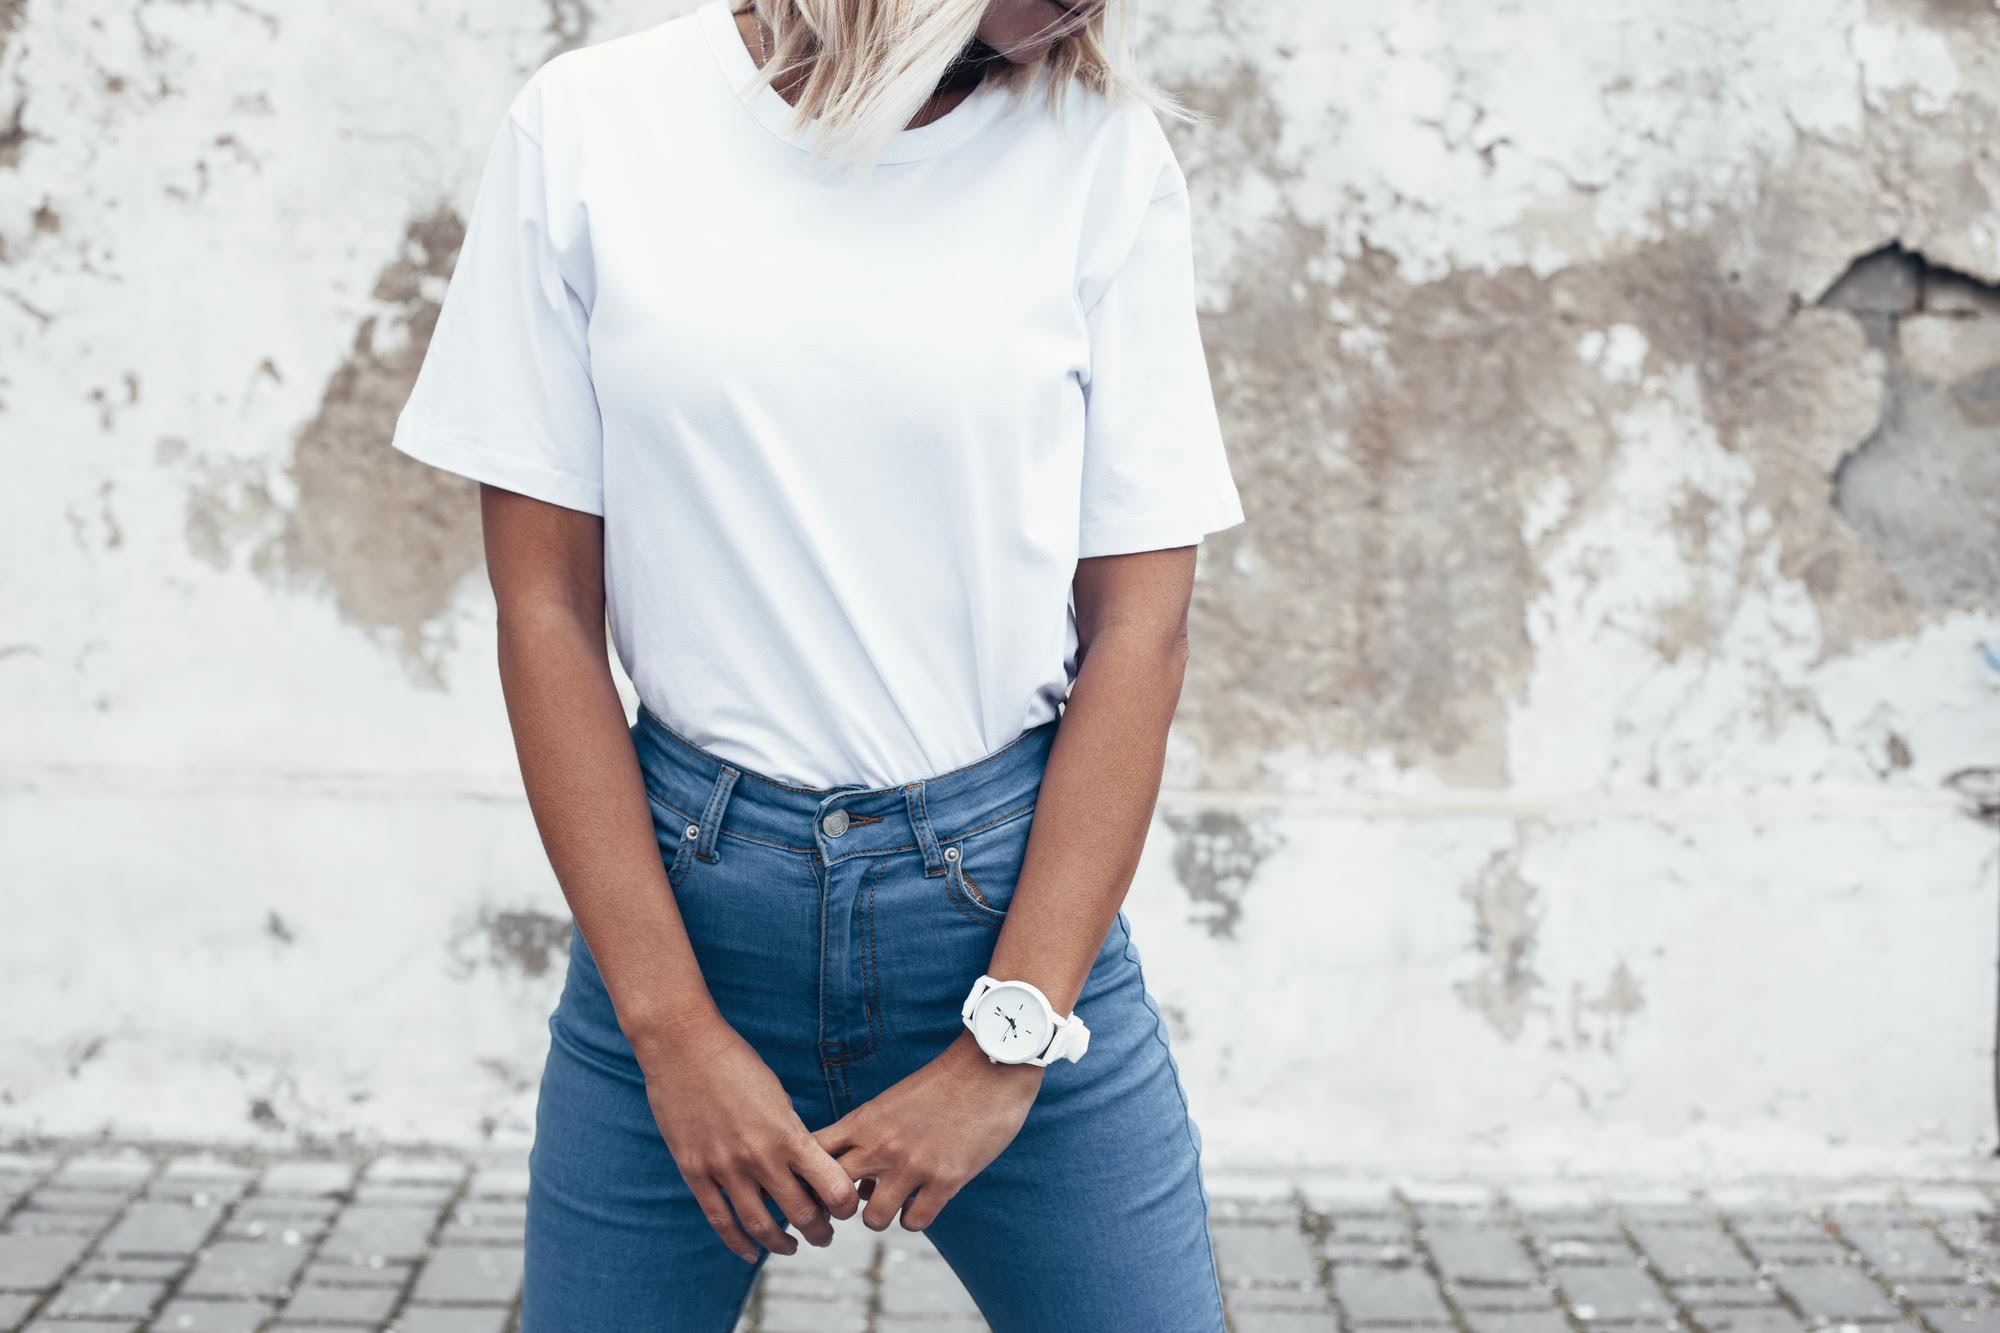 How to Dress up a T-Shirt for Work: 7 Stylish Ways to Wear Your Fav Tee